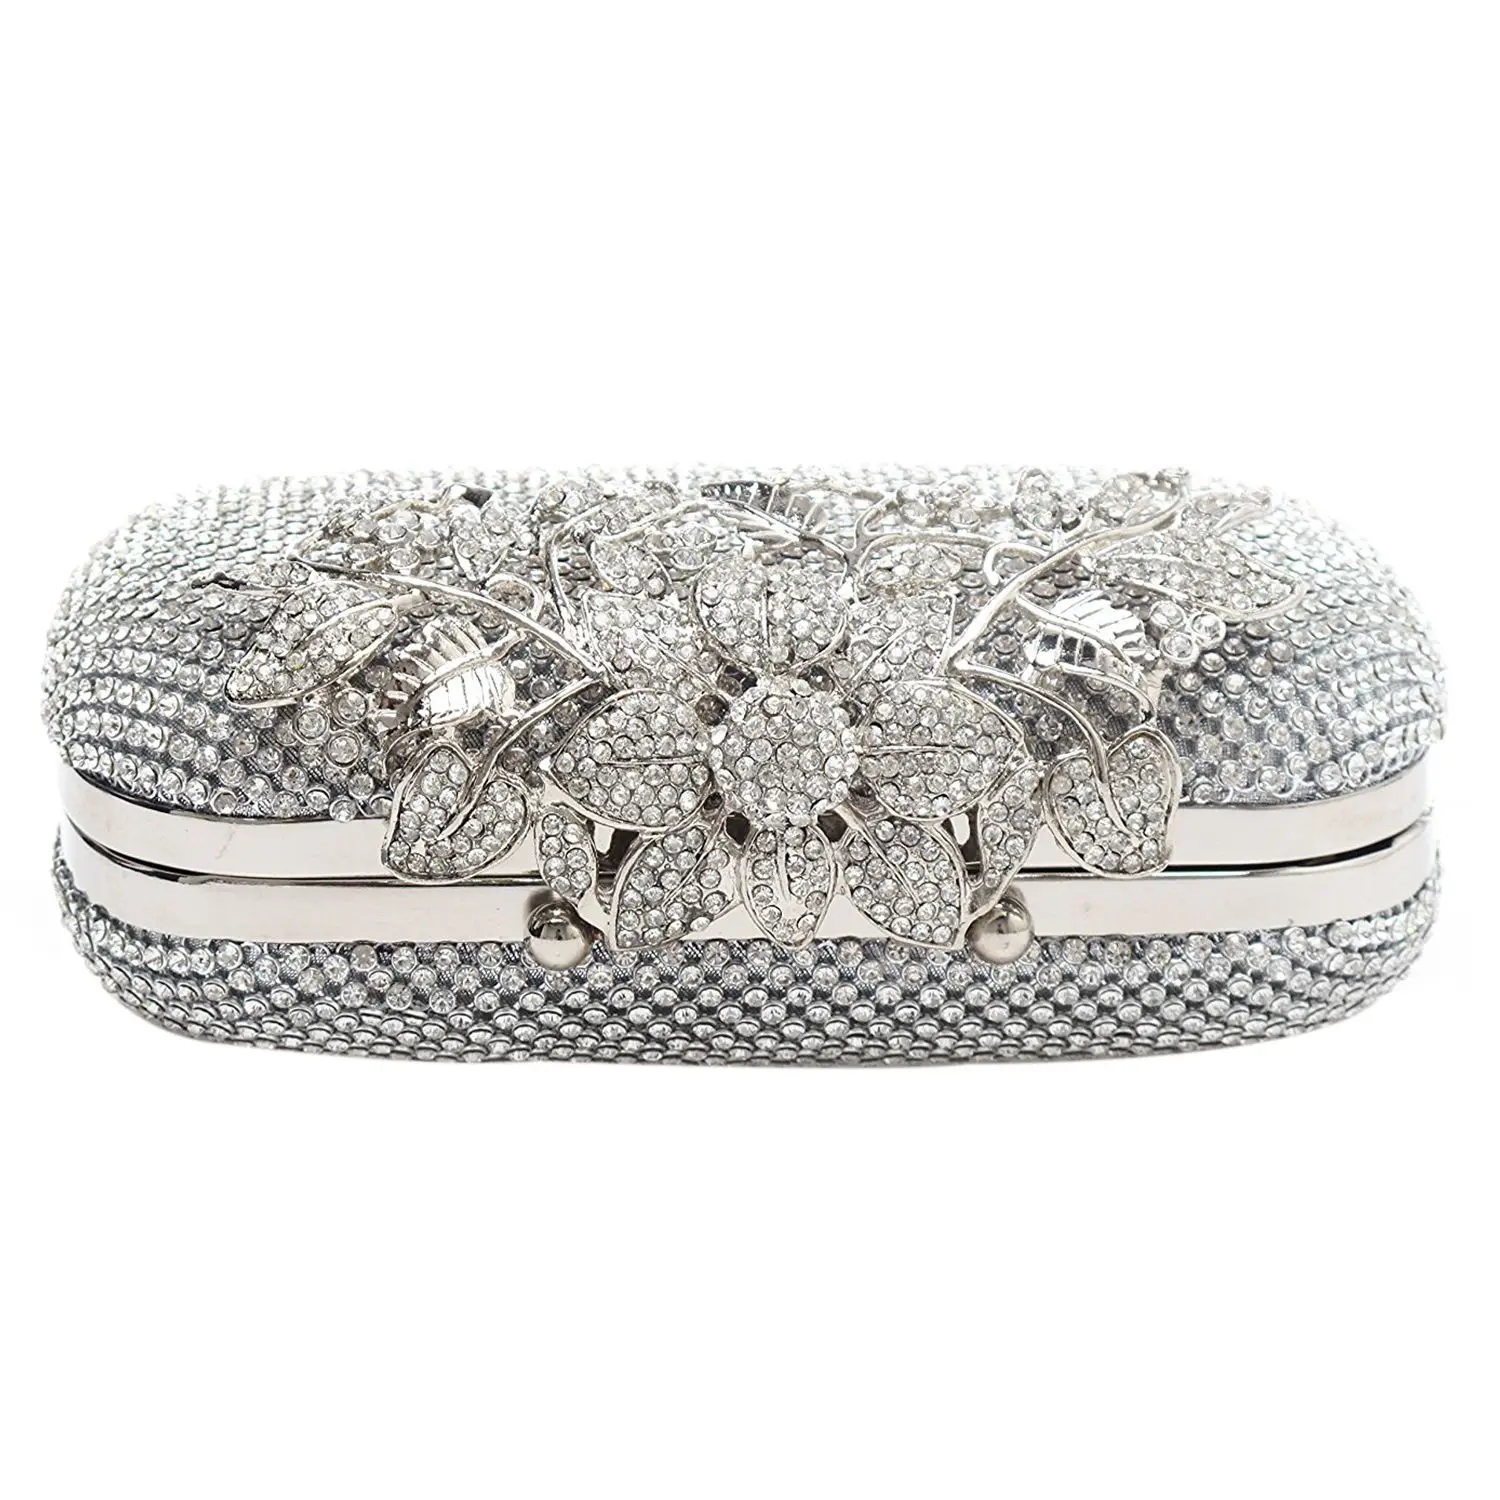 Silver Ring Or Clasp Diamante Clutch Evening Bag Prom Purse Wedding Party 